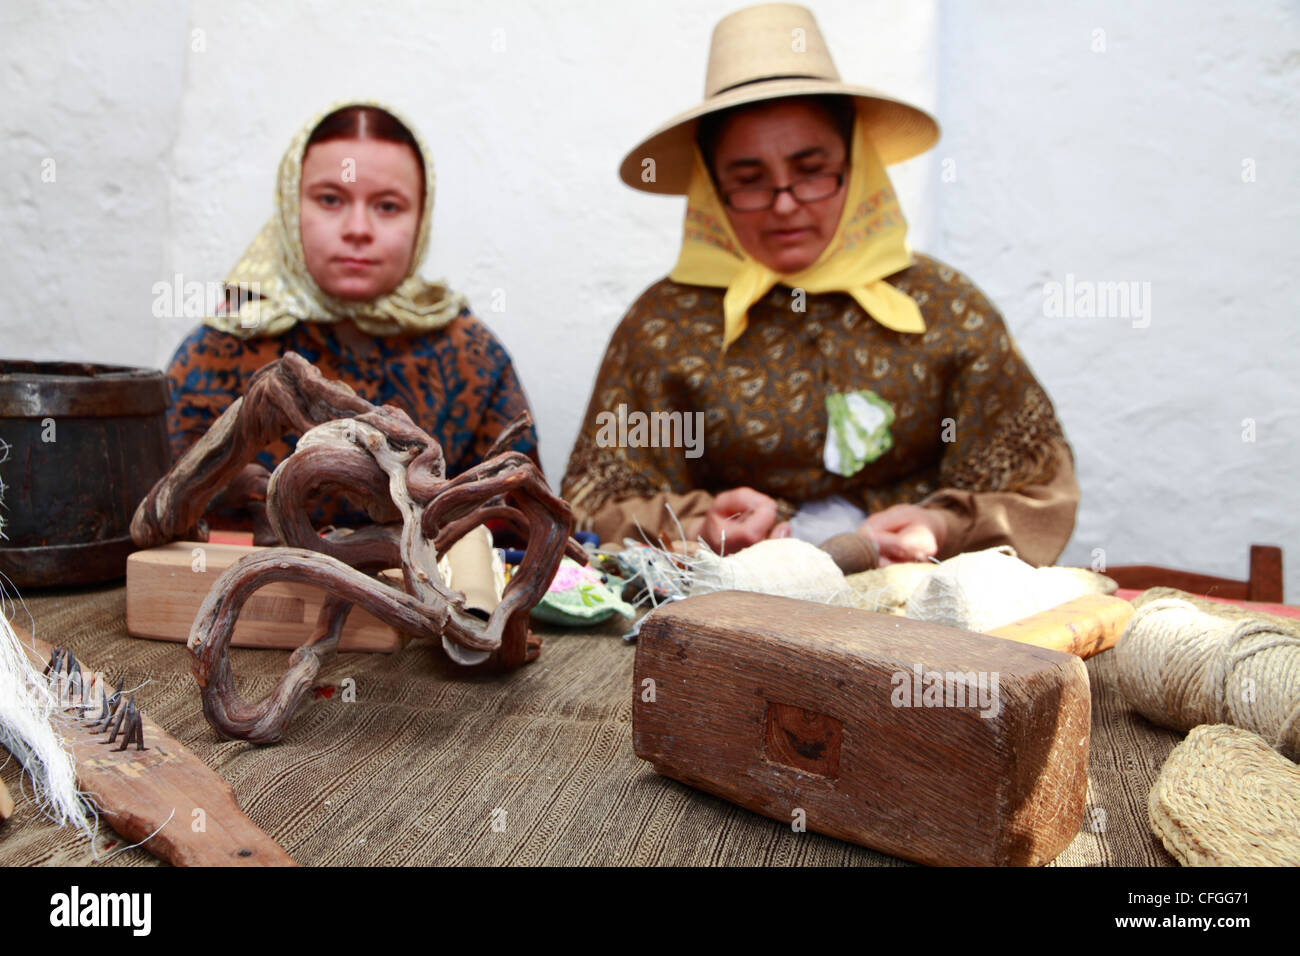 Women in traditional costume making "Espardenyes", the traditional sandals at a handicraft fair, Ibiza, Spain Stock Photo